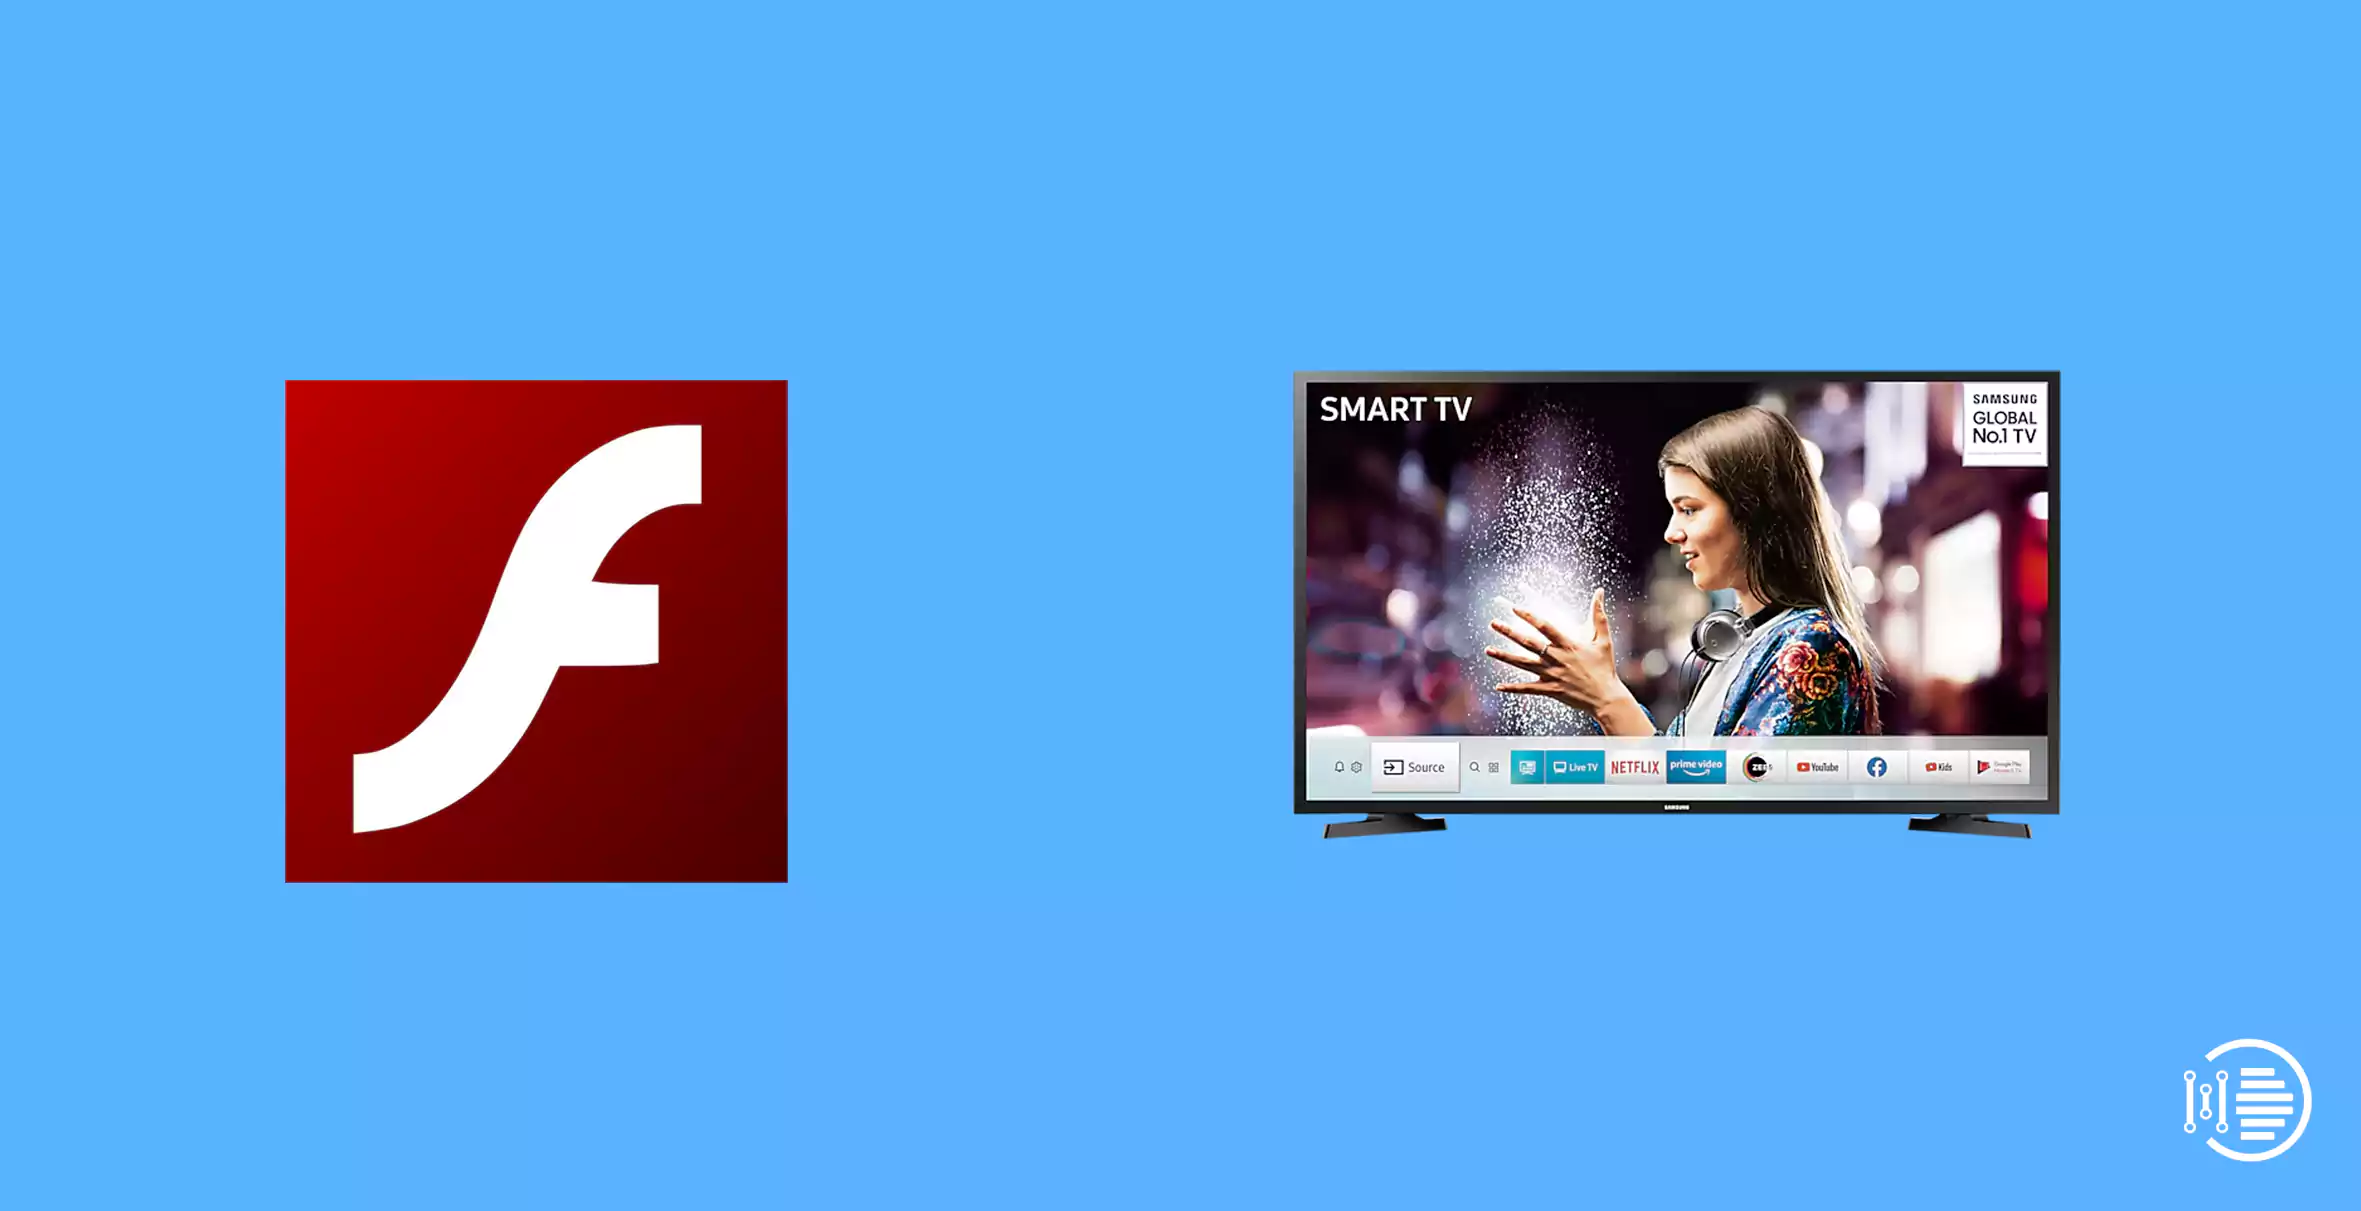 How to Install Flash Player on Samsung Smart TV